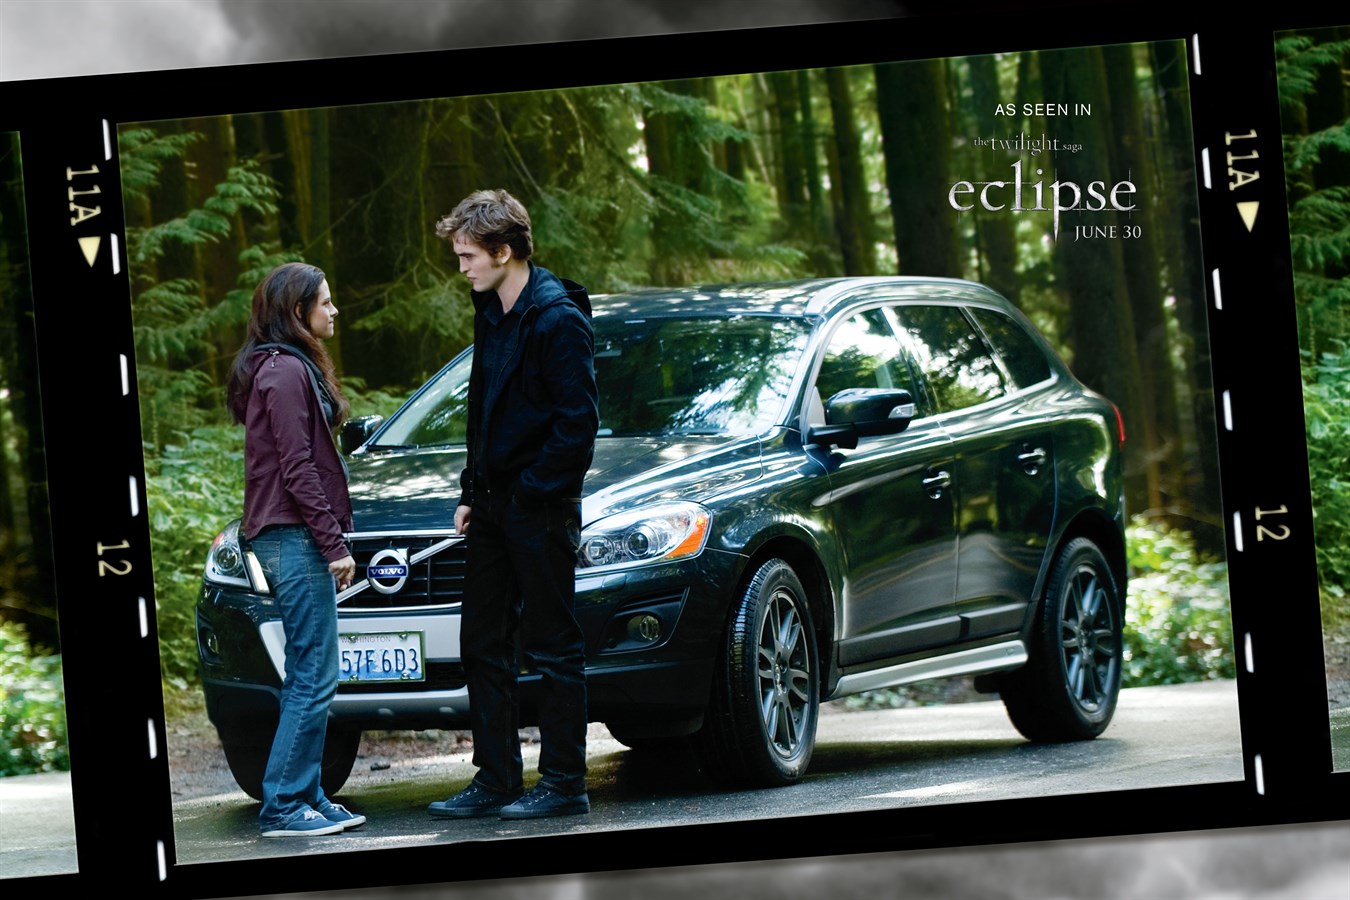 Edward and Bella in front of a Volvo XC60, Eclipse the third film in the Twilight saga